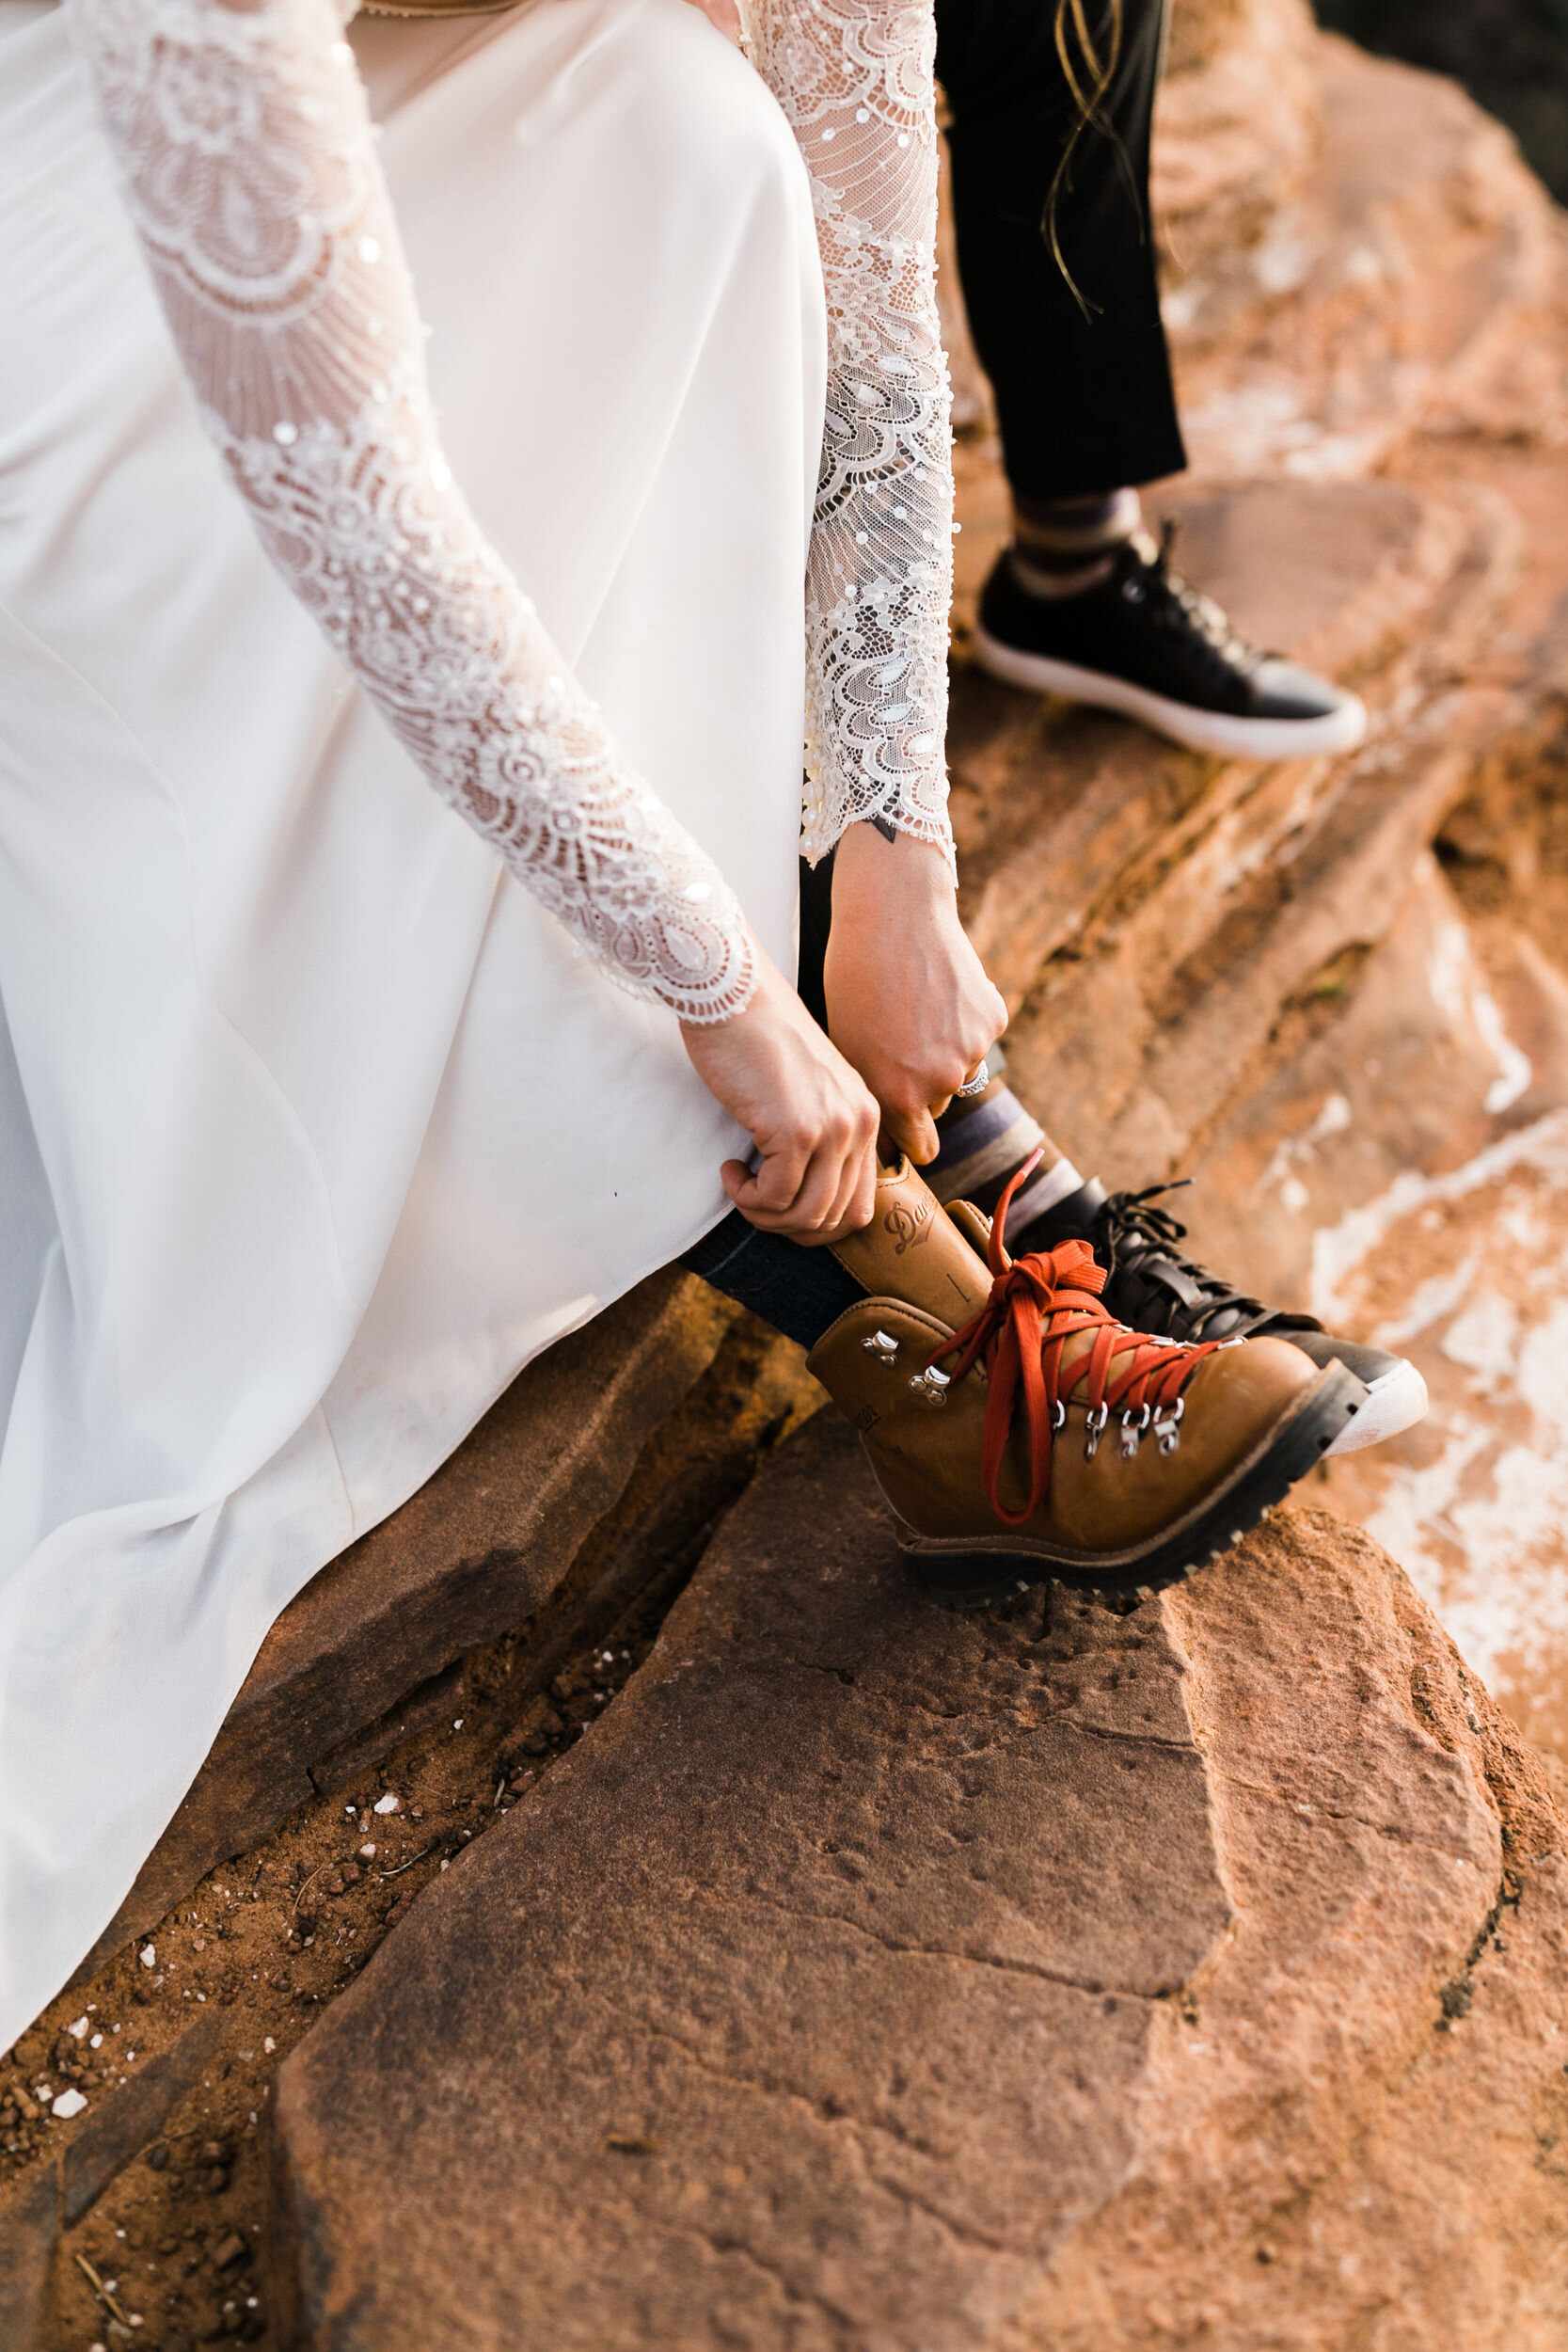 The Hearnes Adventure Photography Best of 2019 | Zion National Park Elopement and Wedding Photographers